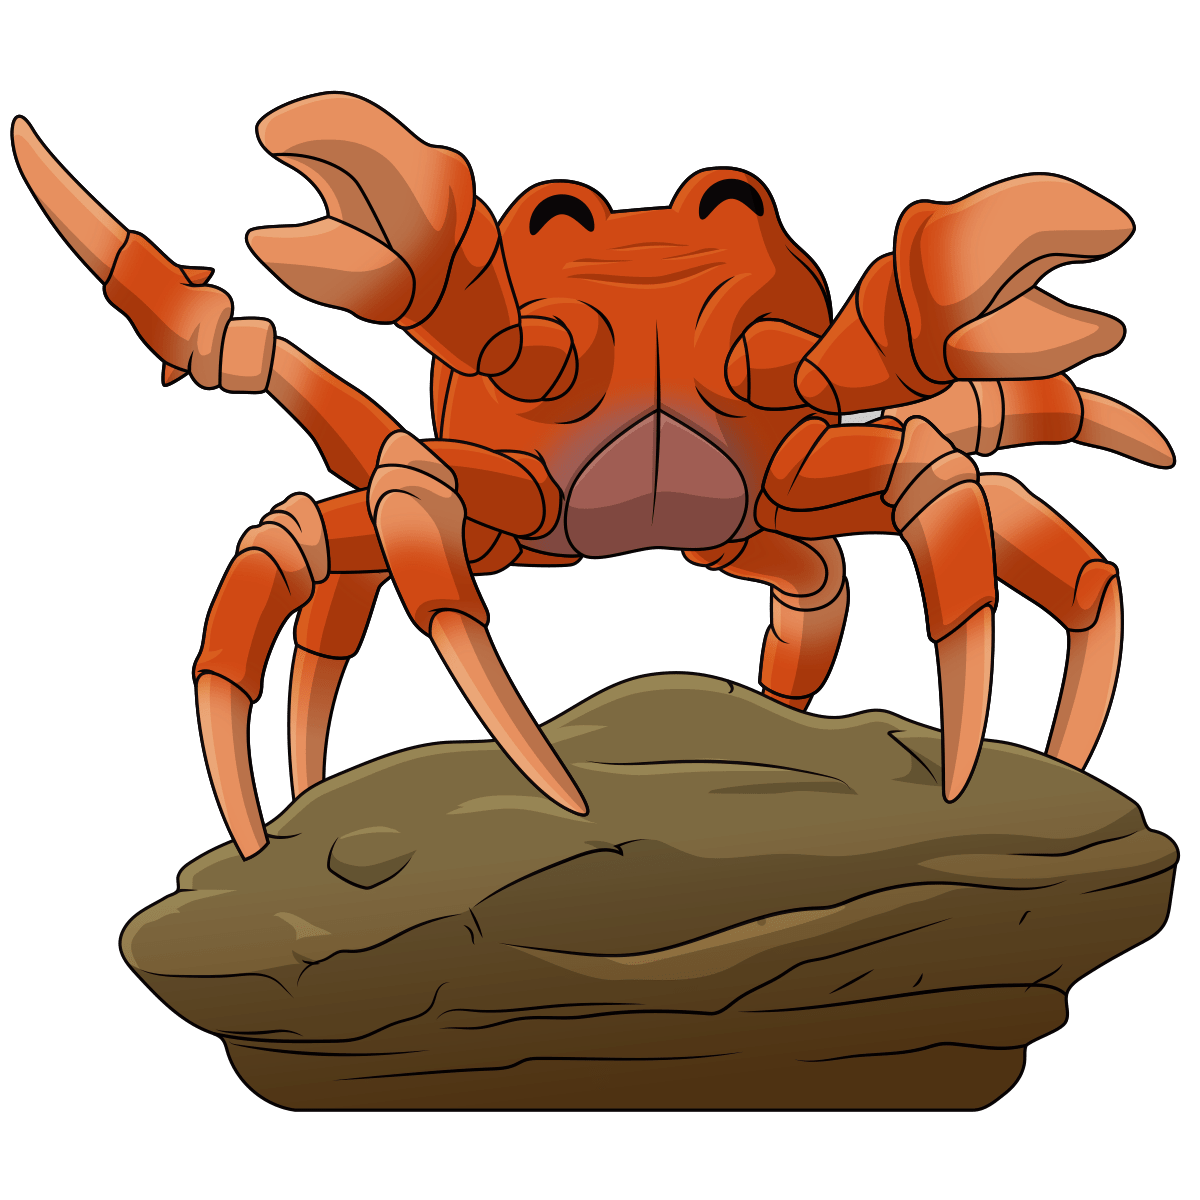 Crab Rave Youtooz Collectibles